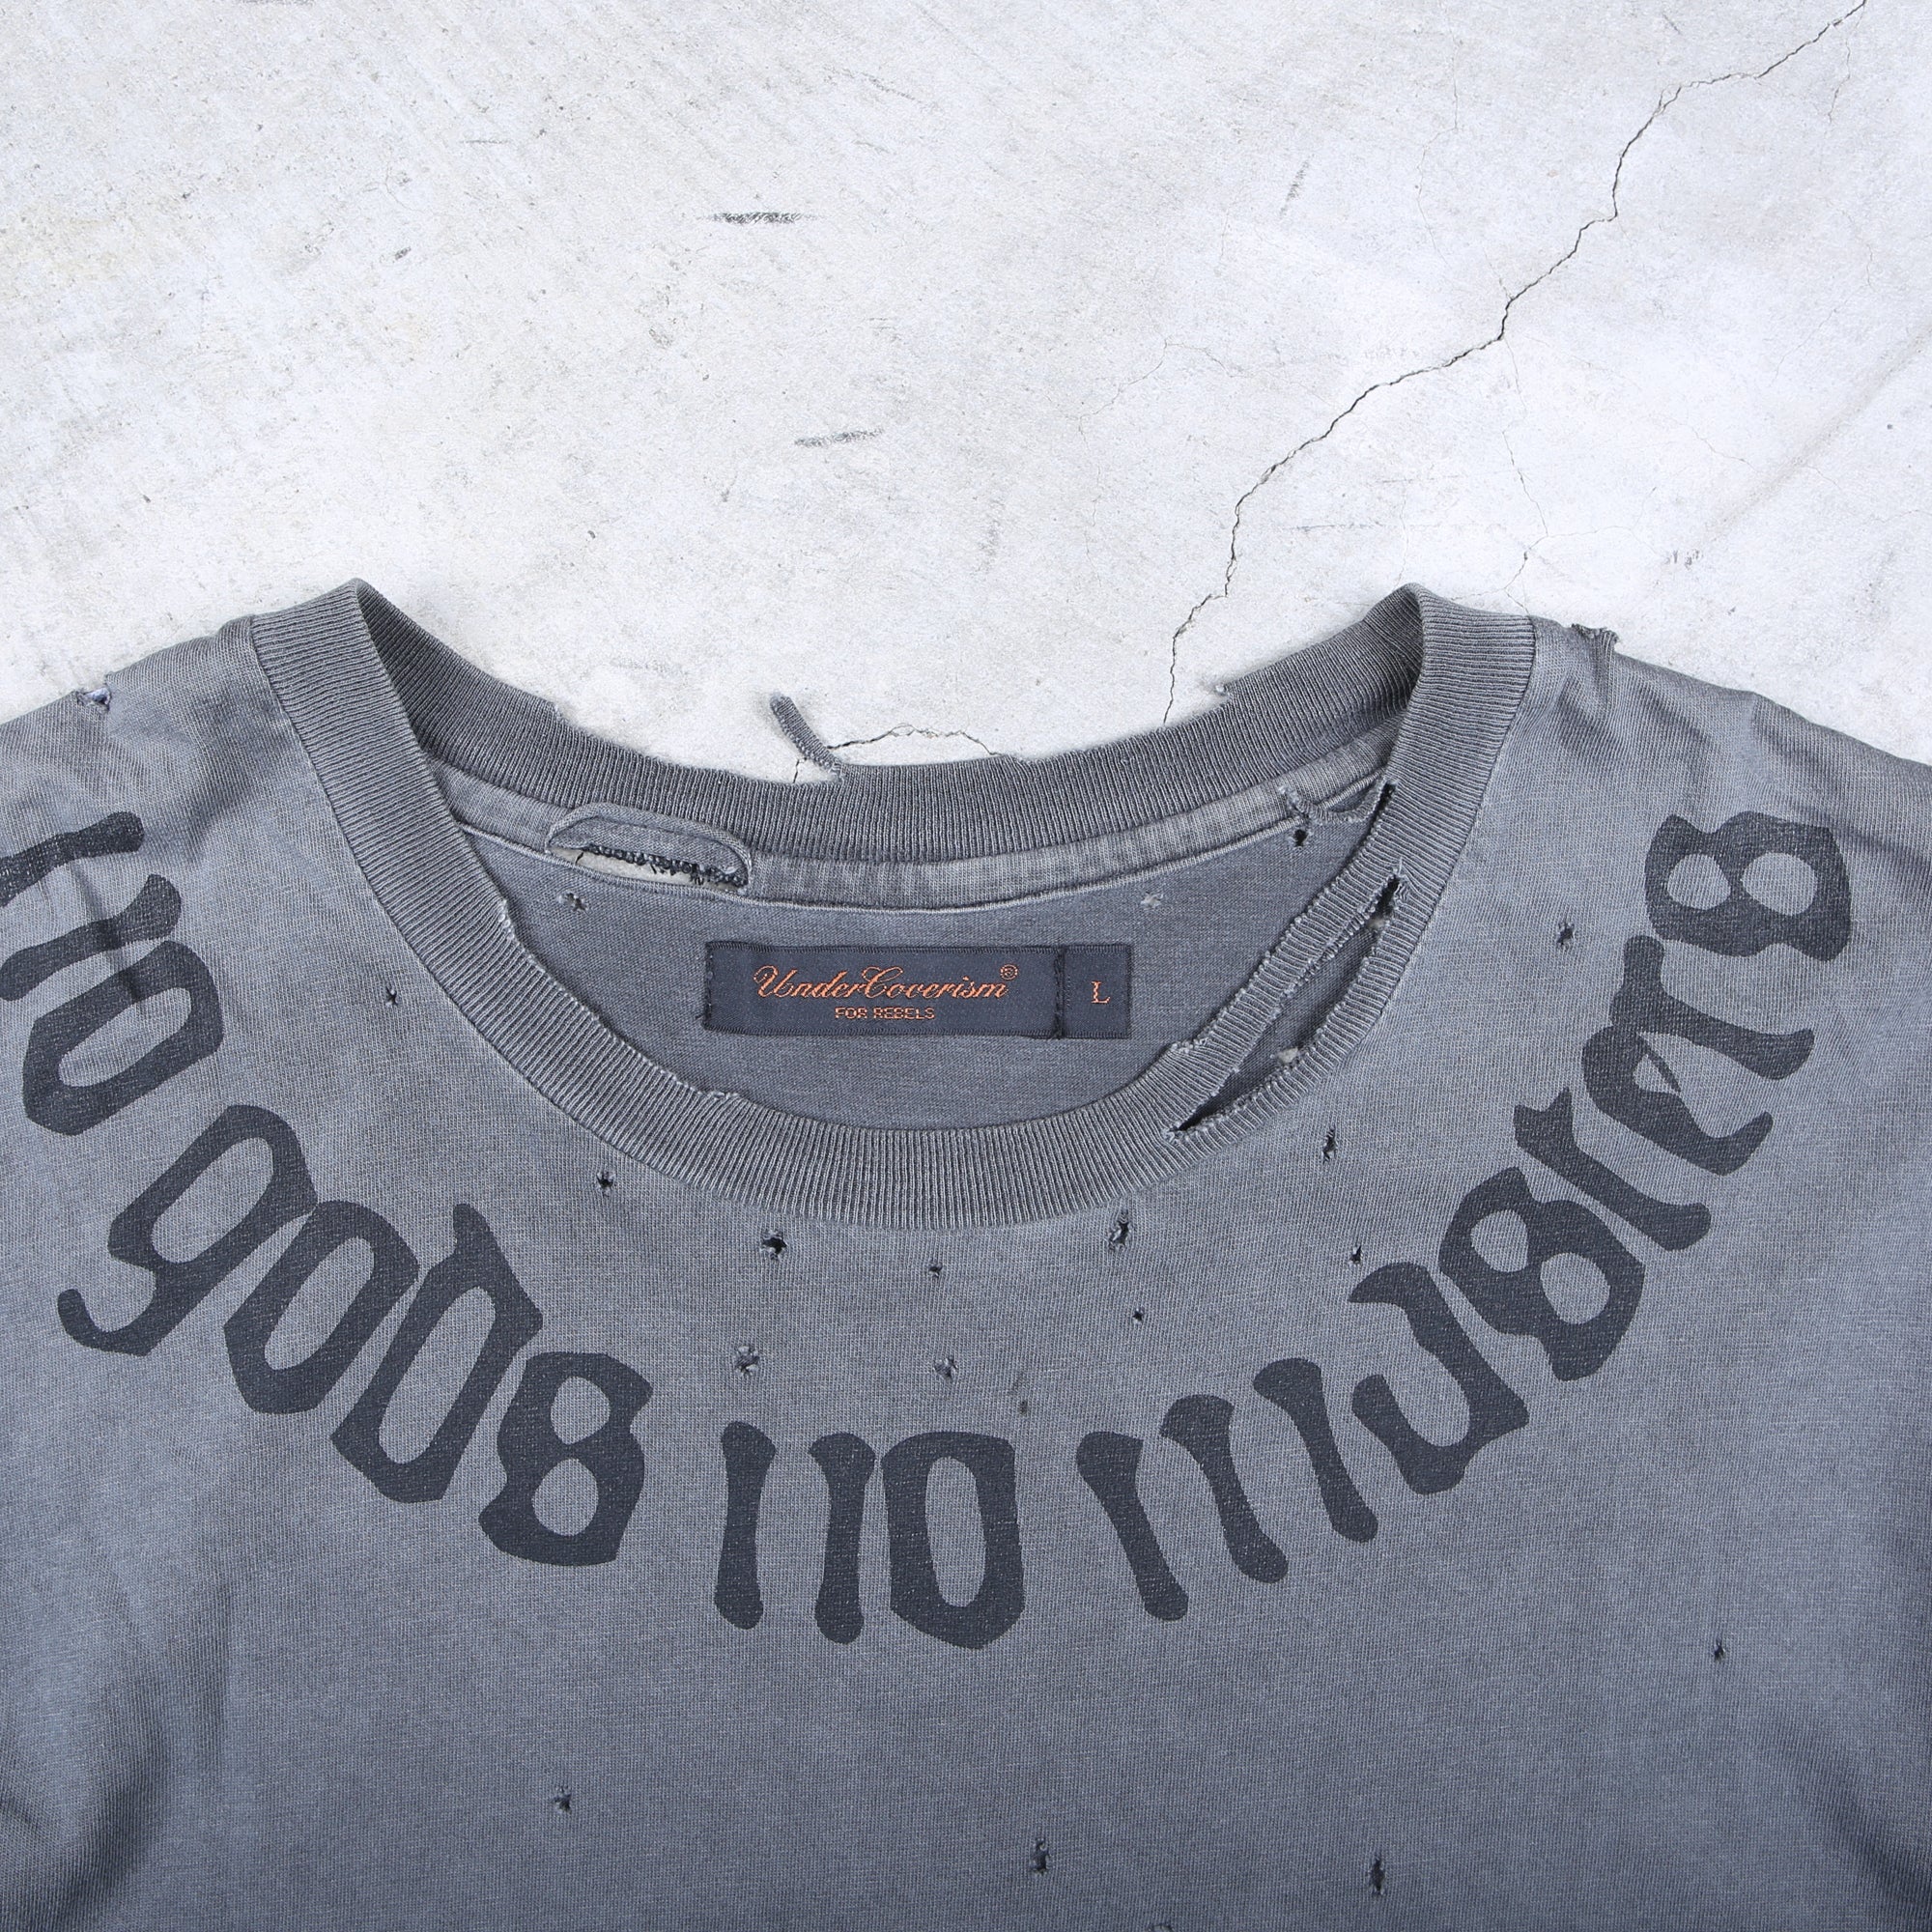 Undercover "No Gods No Master" Tee Size Large SS/03 "SCAB"